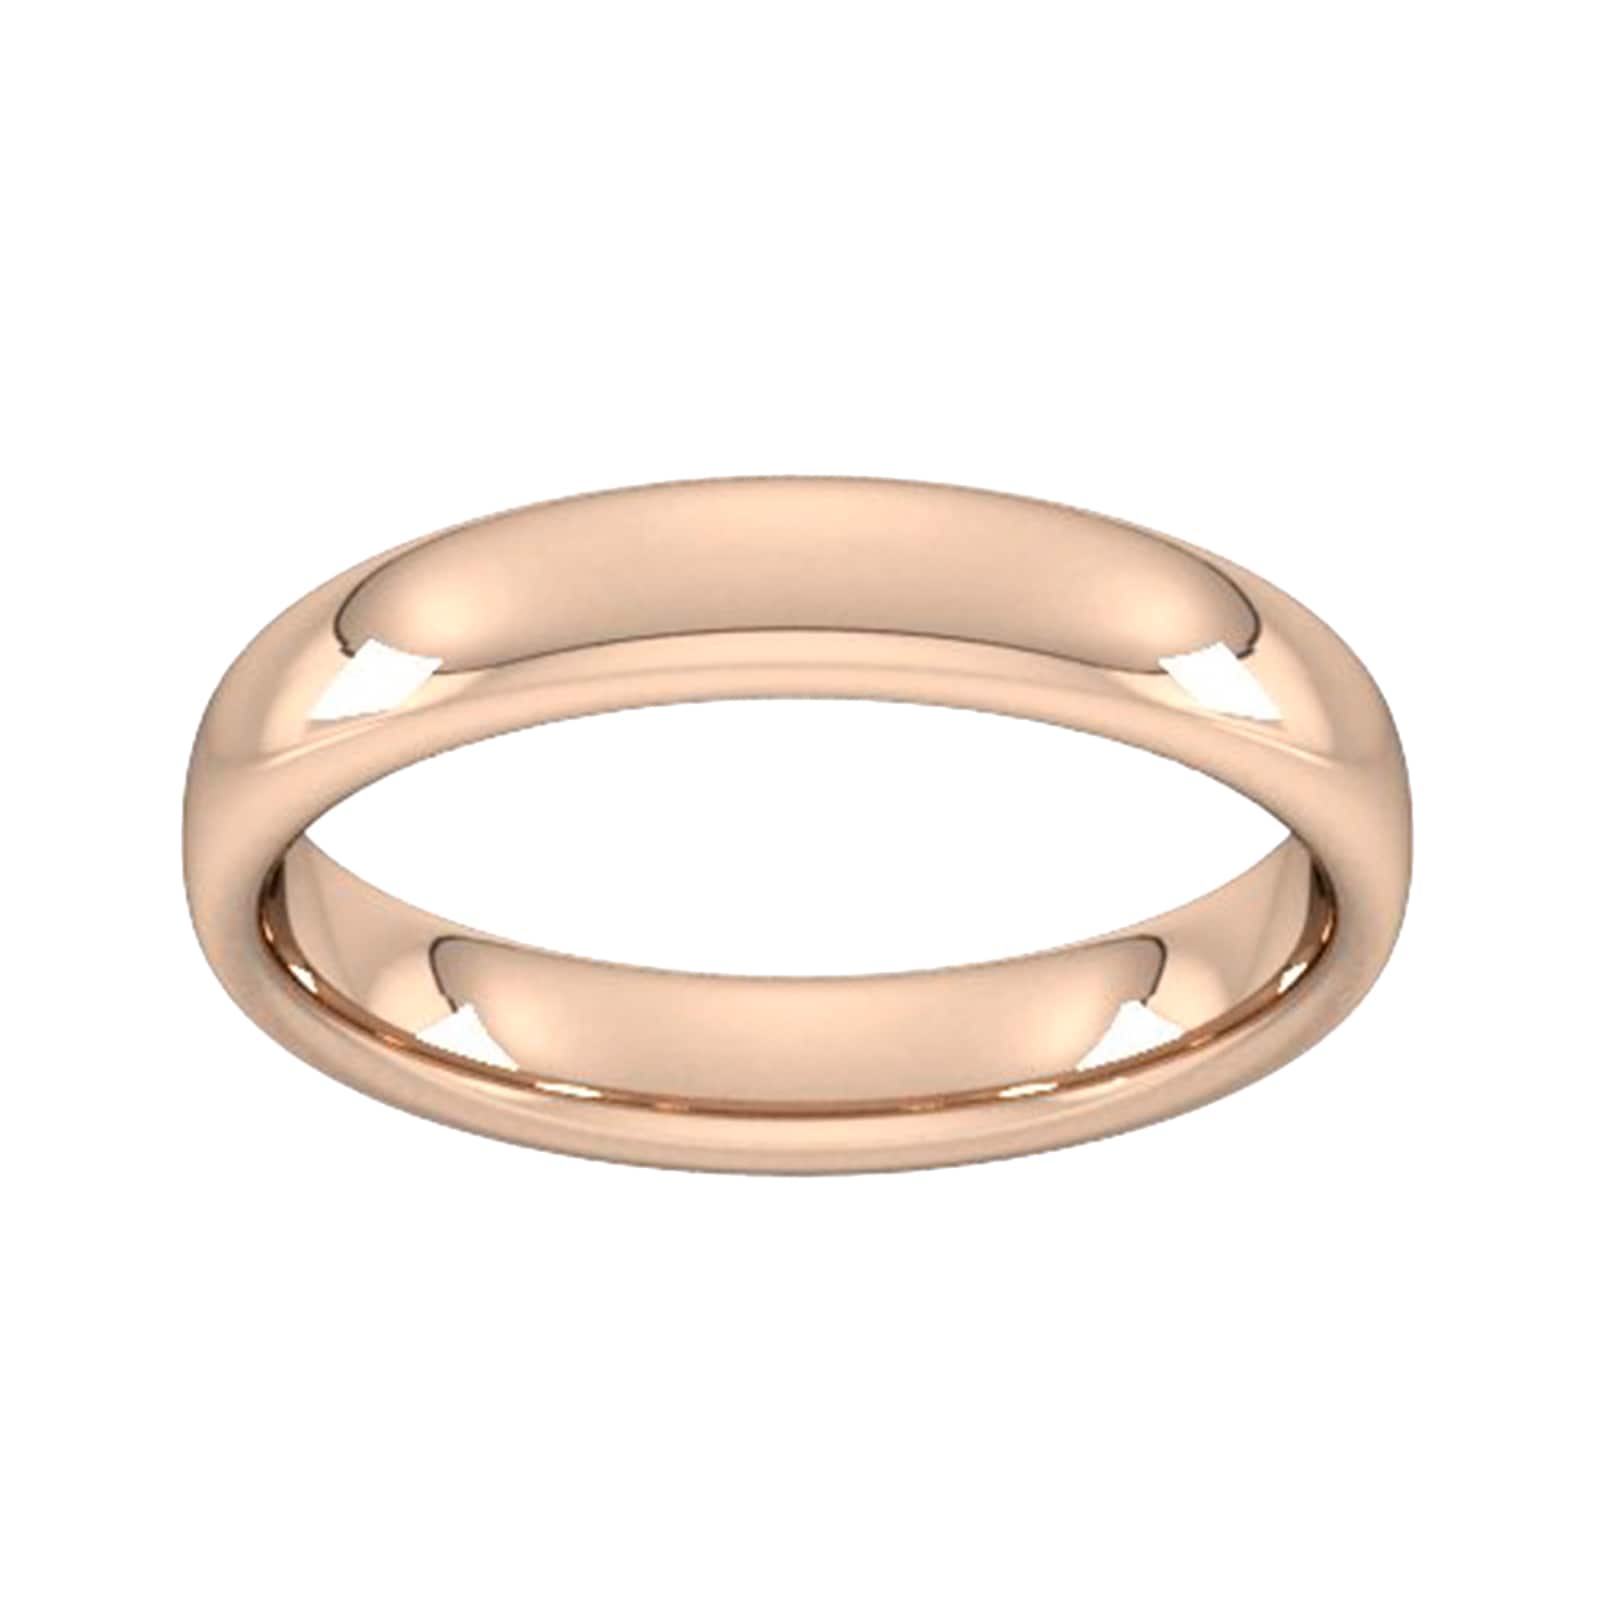 4mm Slight Court Heavy Wedding Ring In 18 Carat Rose Gold - Ring Size N